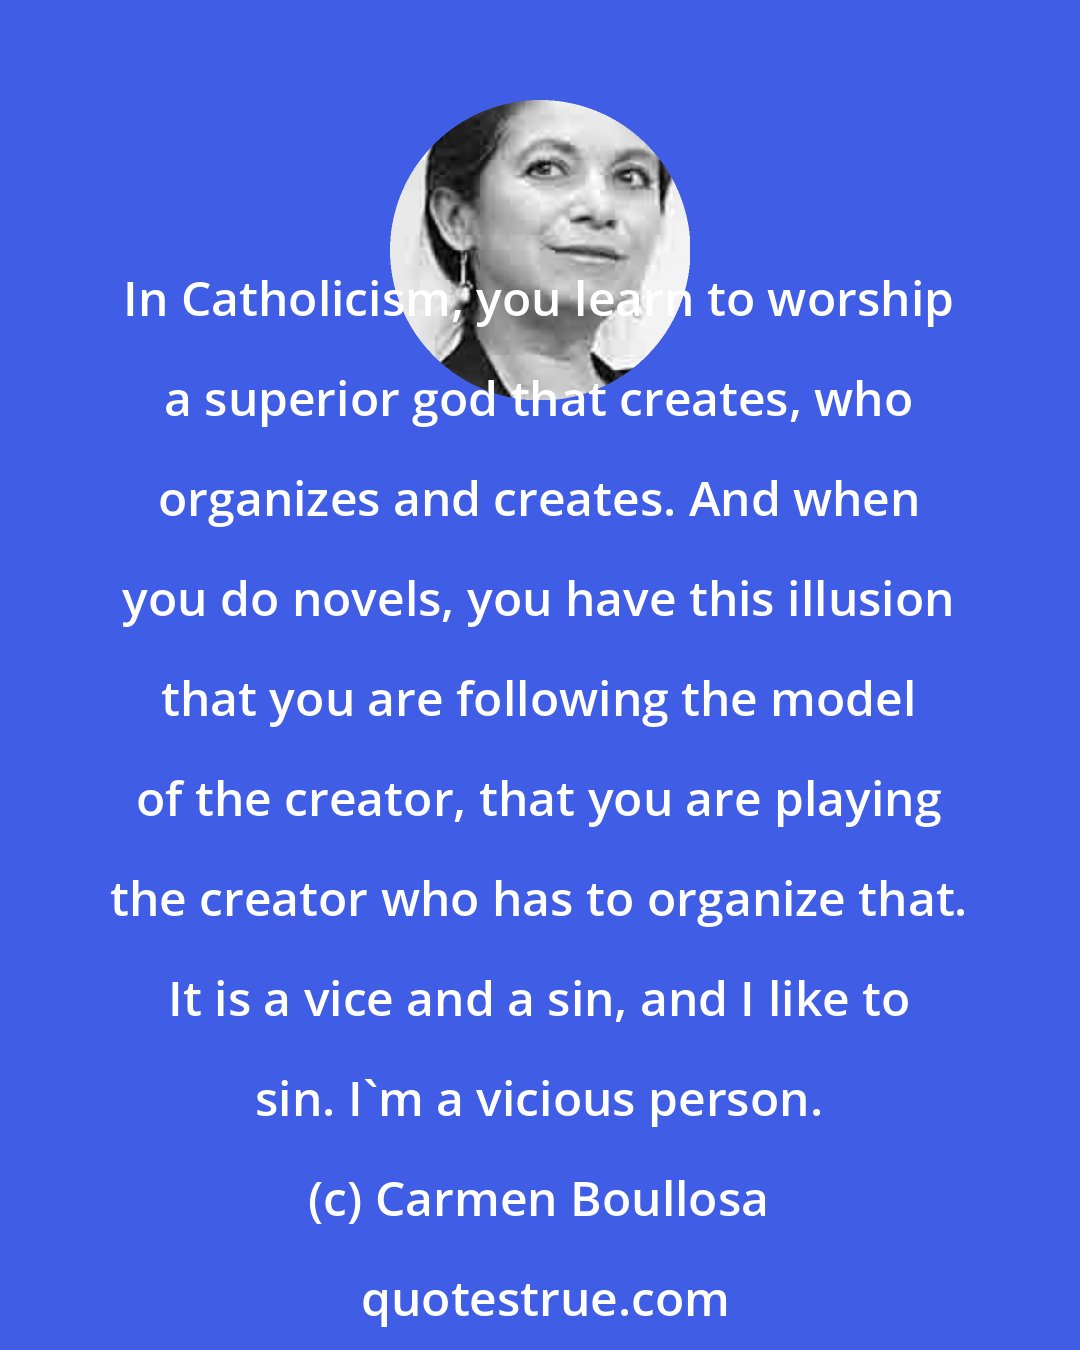 Carmen Boullosa: In Catholicism, you learn to worship a superior god that creates, who organizes and creates. And when you do novels, you have this illusion that you are following the model of the creator, that you are playing the creator who has to organize that. It is a vice and a sin, and I like to sin. I'm a vicious person.